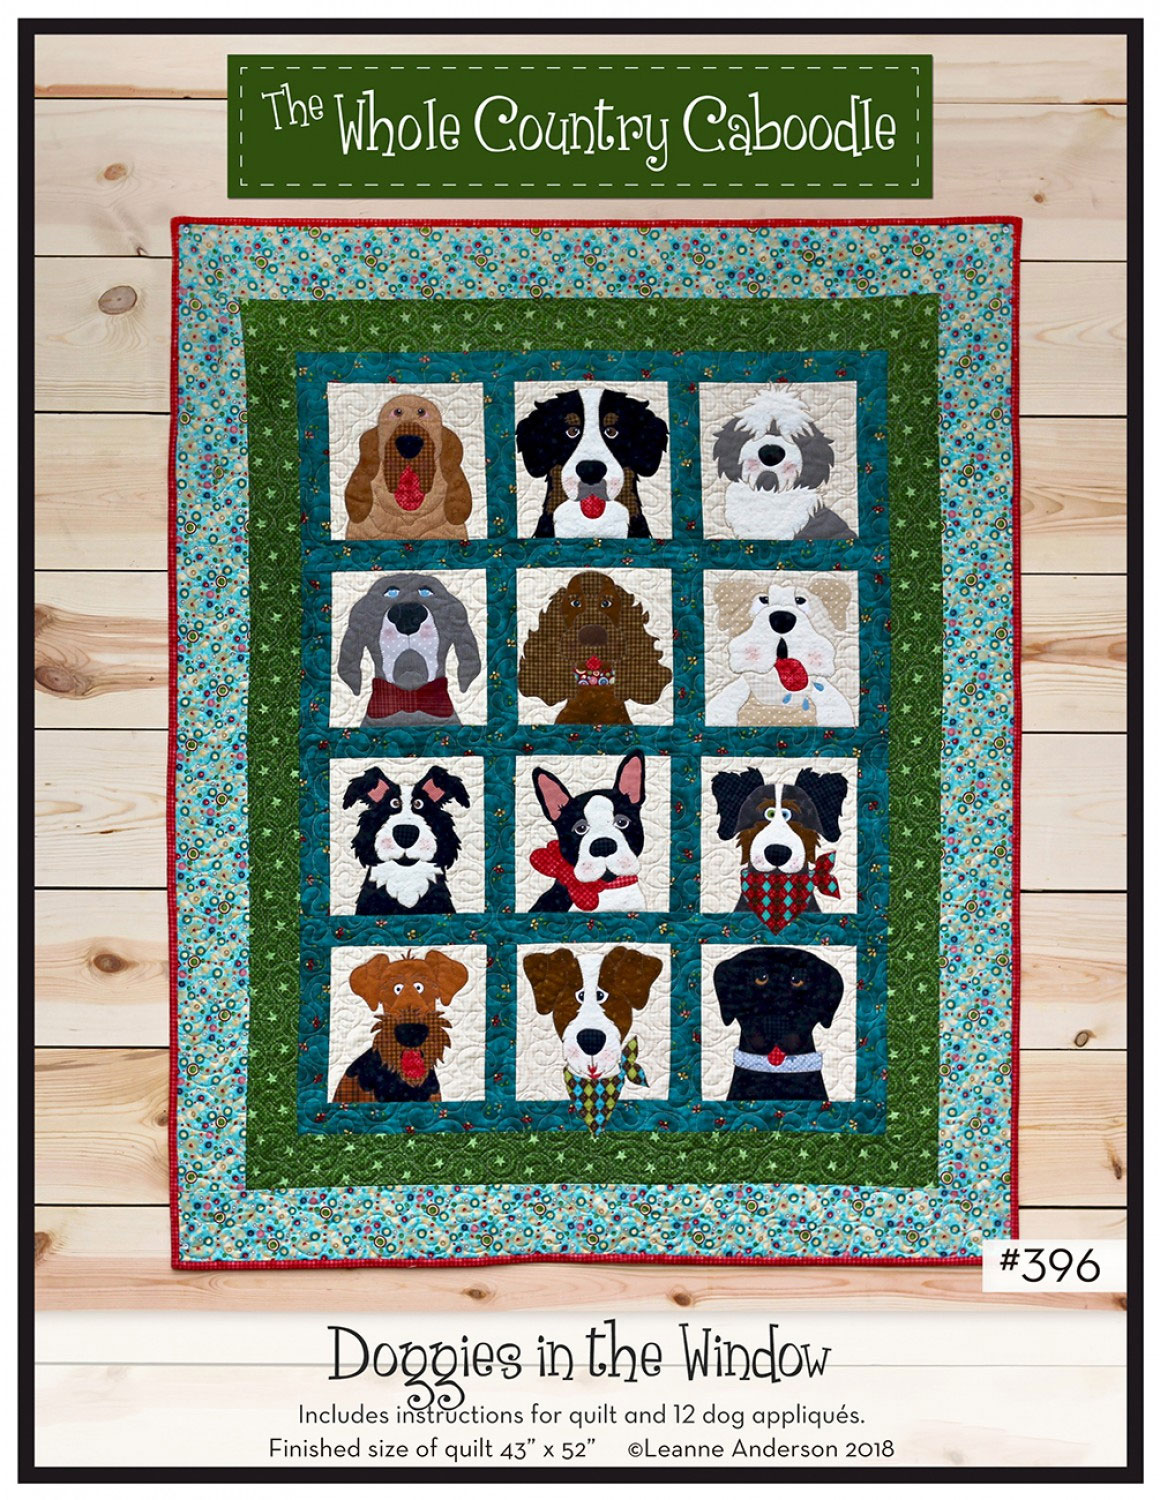 Doggies-in-the-Windows-sewing-pattern-The-Whole-Country-Caboodle-front